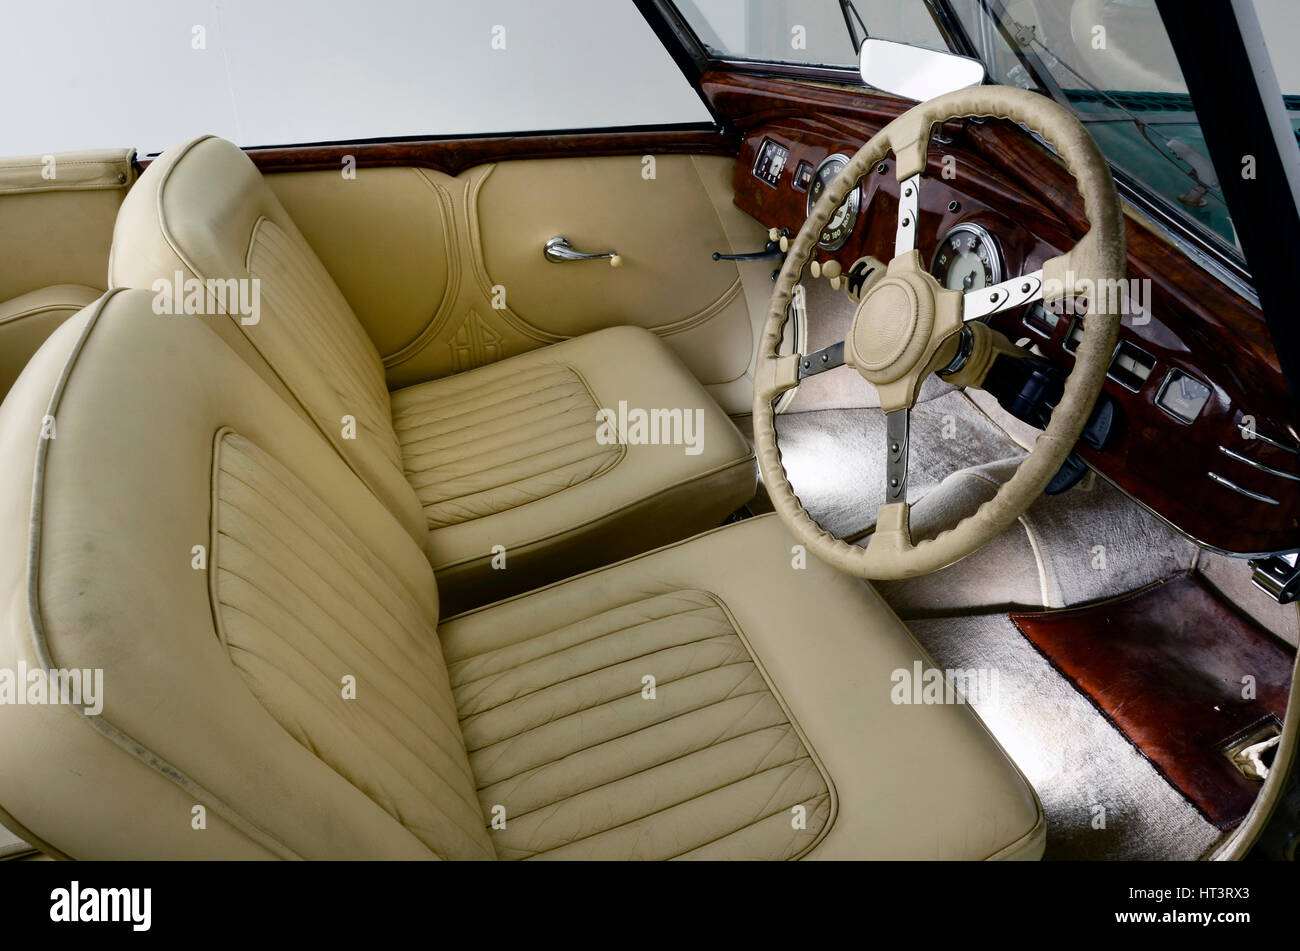 1939 Delahaye Speciale Type 135 MS Artist: Unknown. Stock Photo